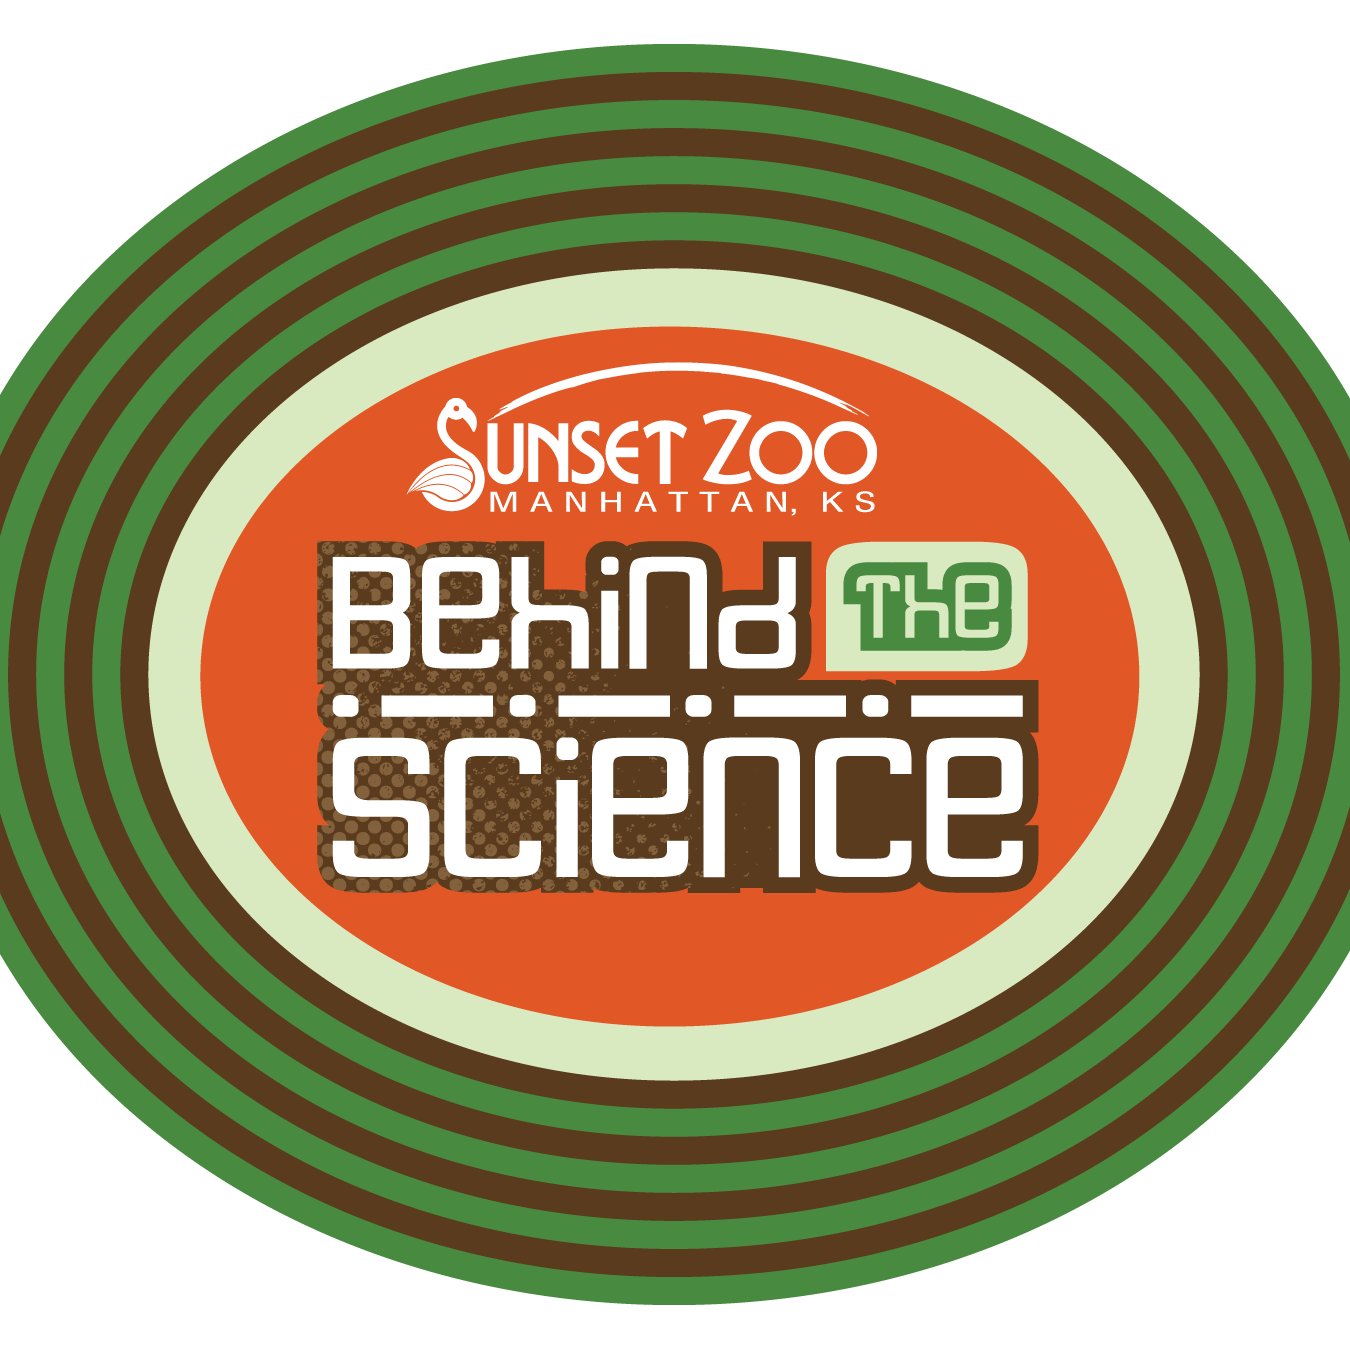 Sunset Zoo's initiative to take the public behind the scenes of scientific research.